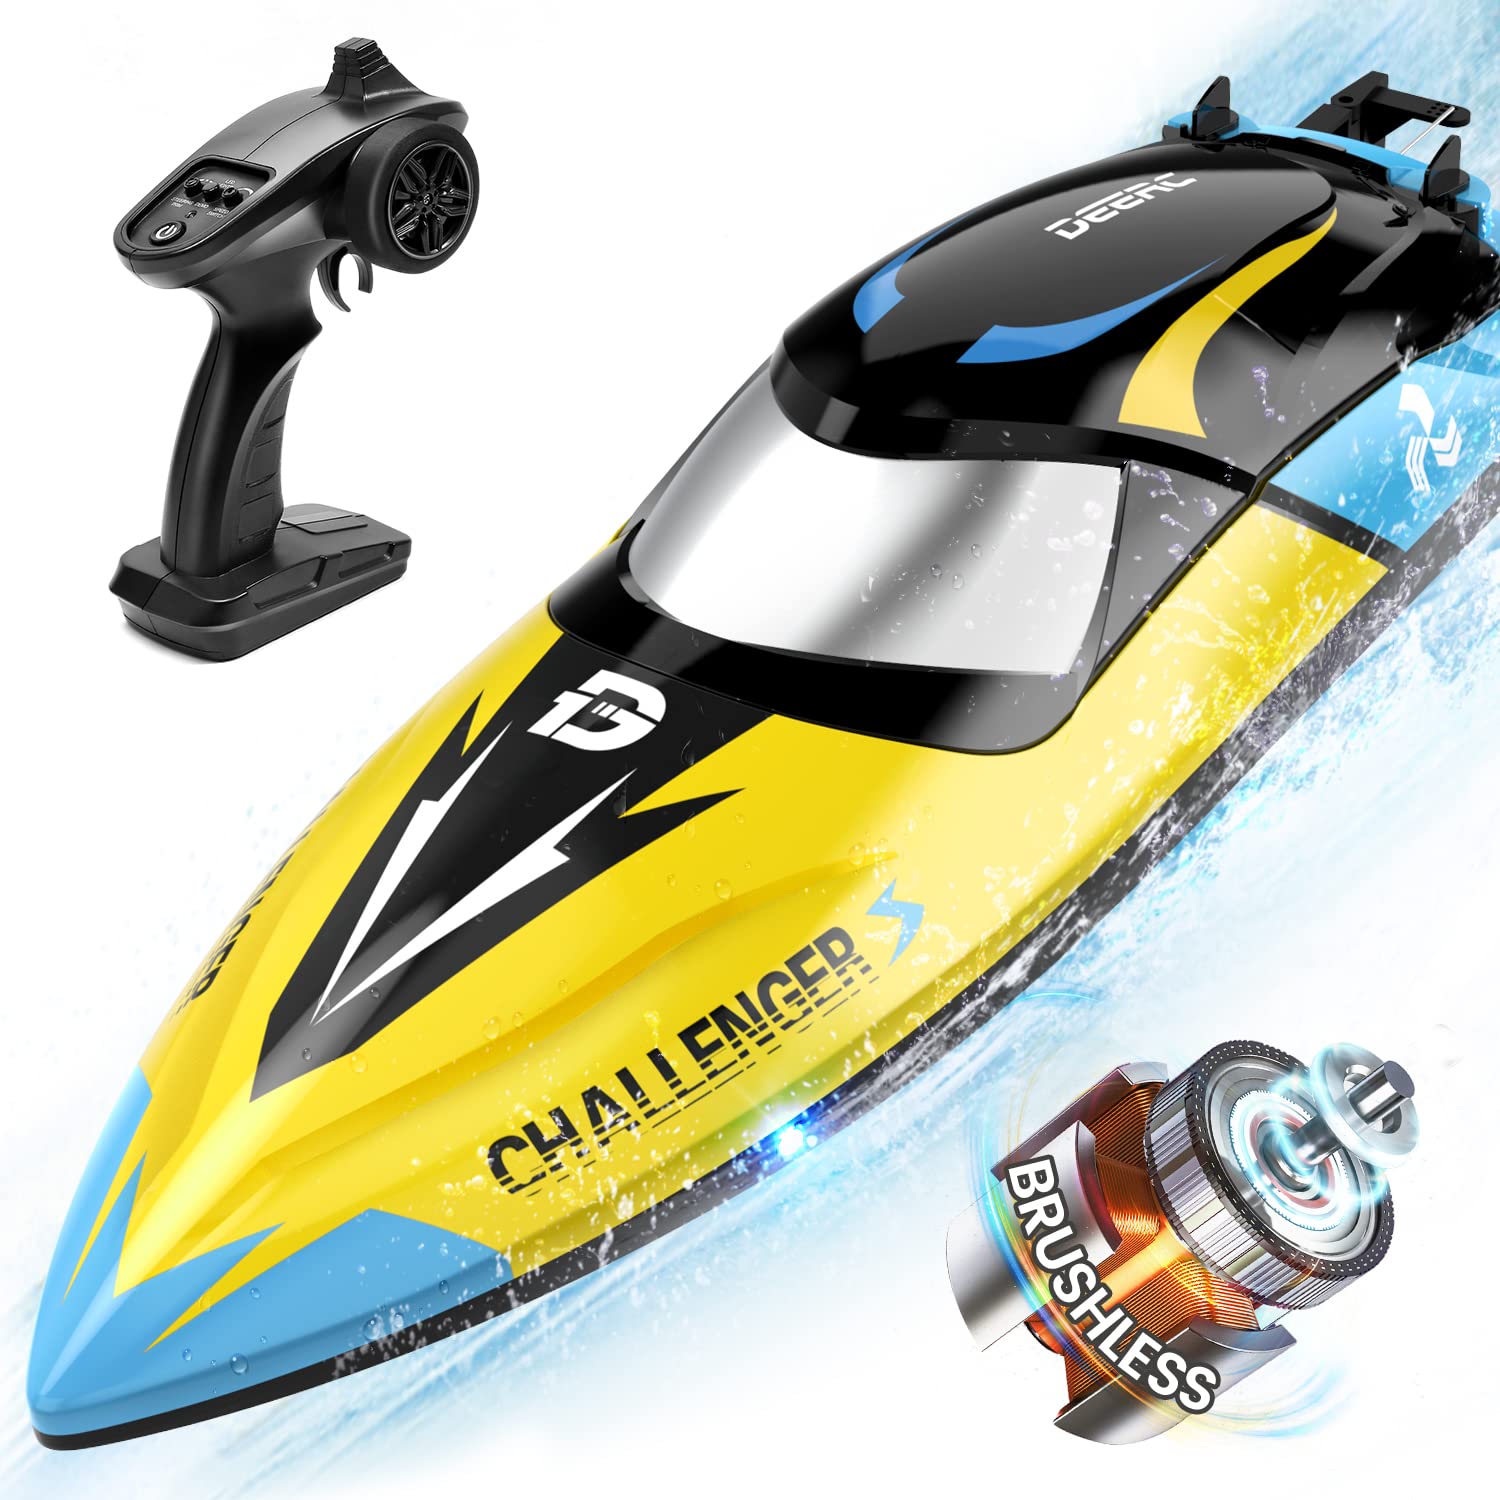 DEERC Brushless RC Boat, 30+ mph Fast Remote Control Boats with Never Capsize&Low Battery Alarm Function, 2.4GHz Racing Boat with LED Lights for Seas, Pools&Lakes, Speed Boat Toy for Adults Boys&Girls